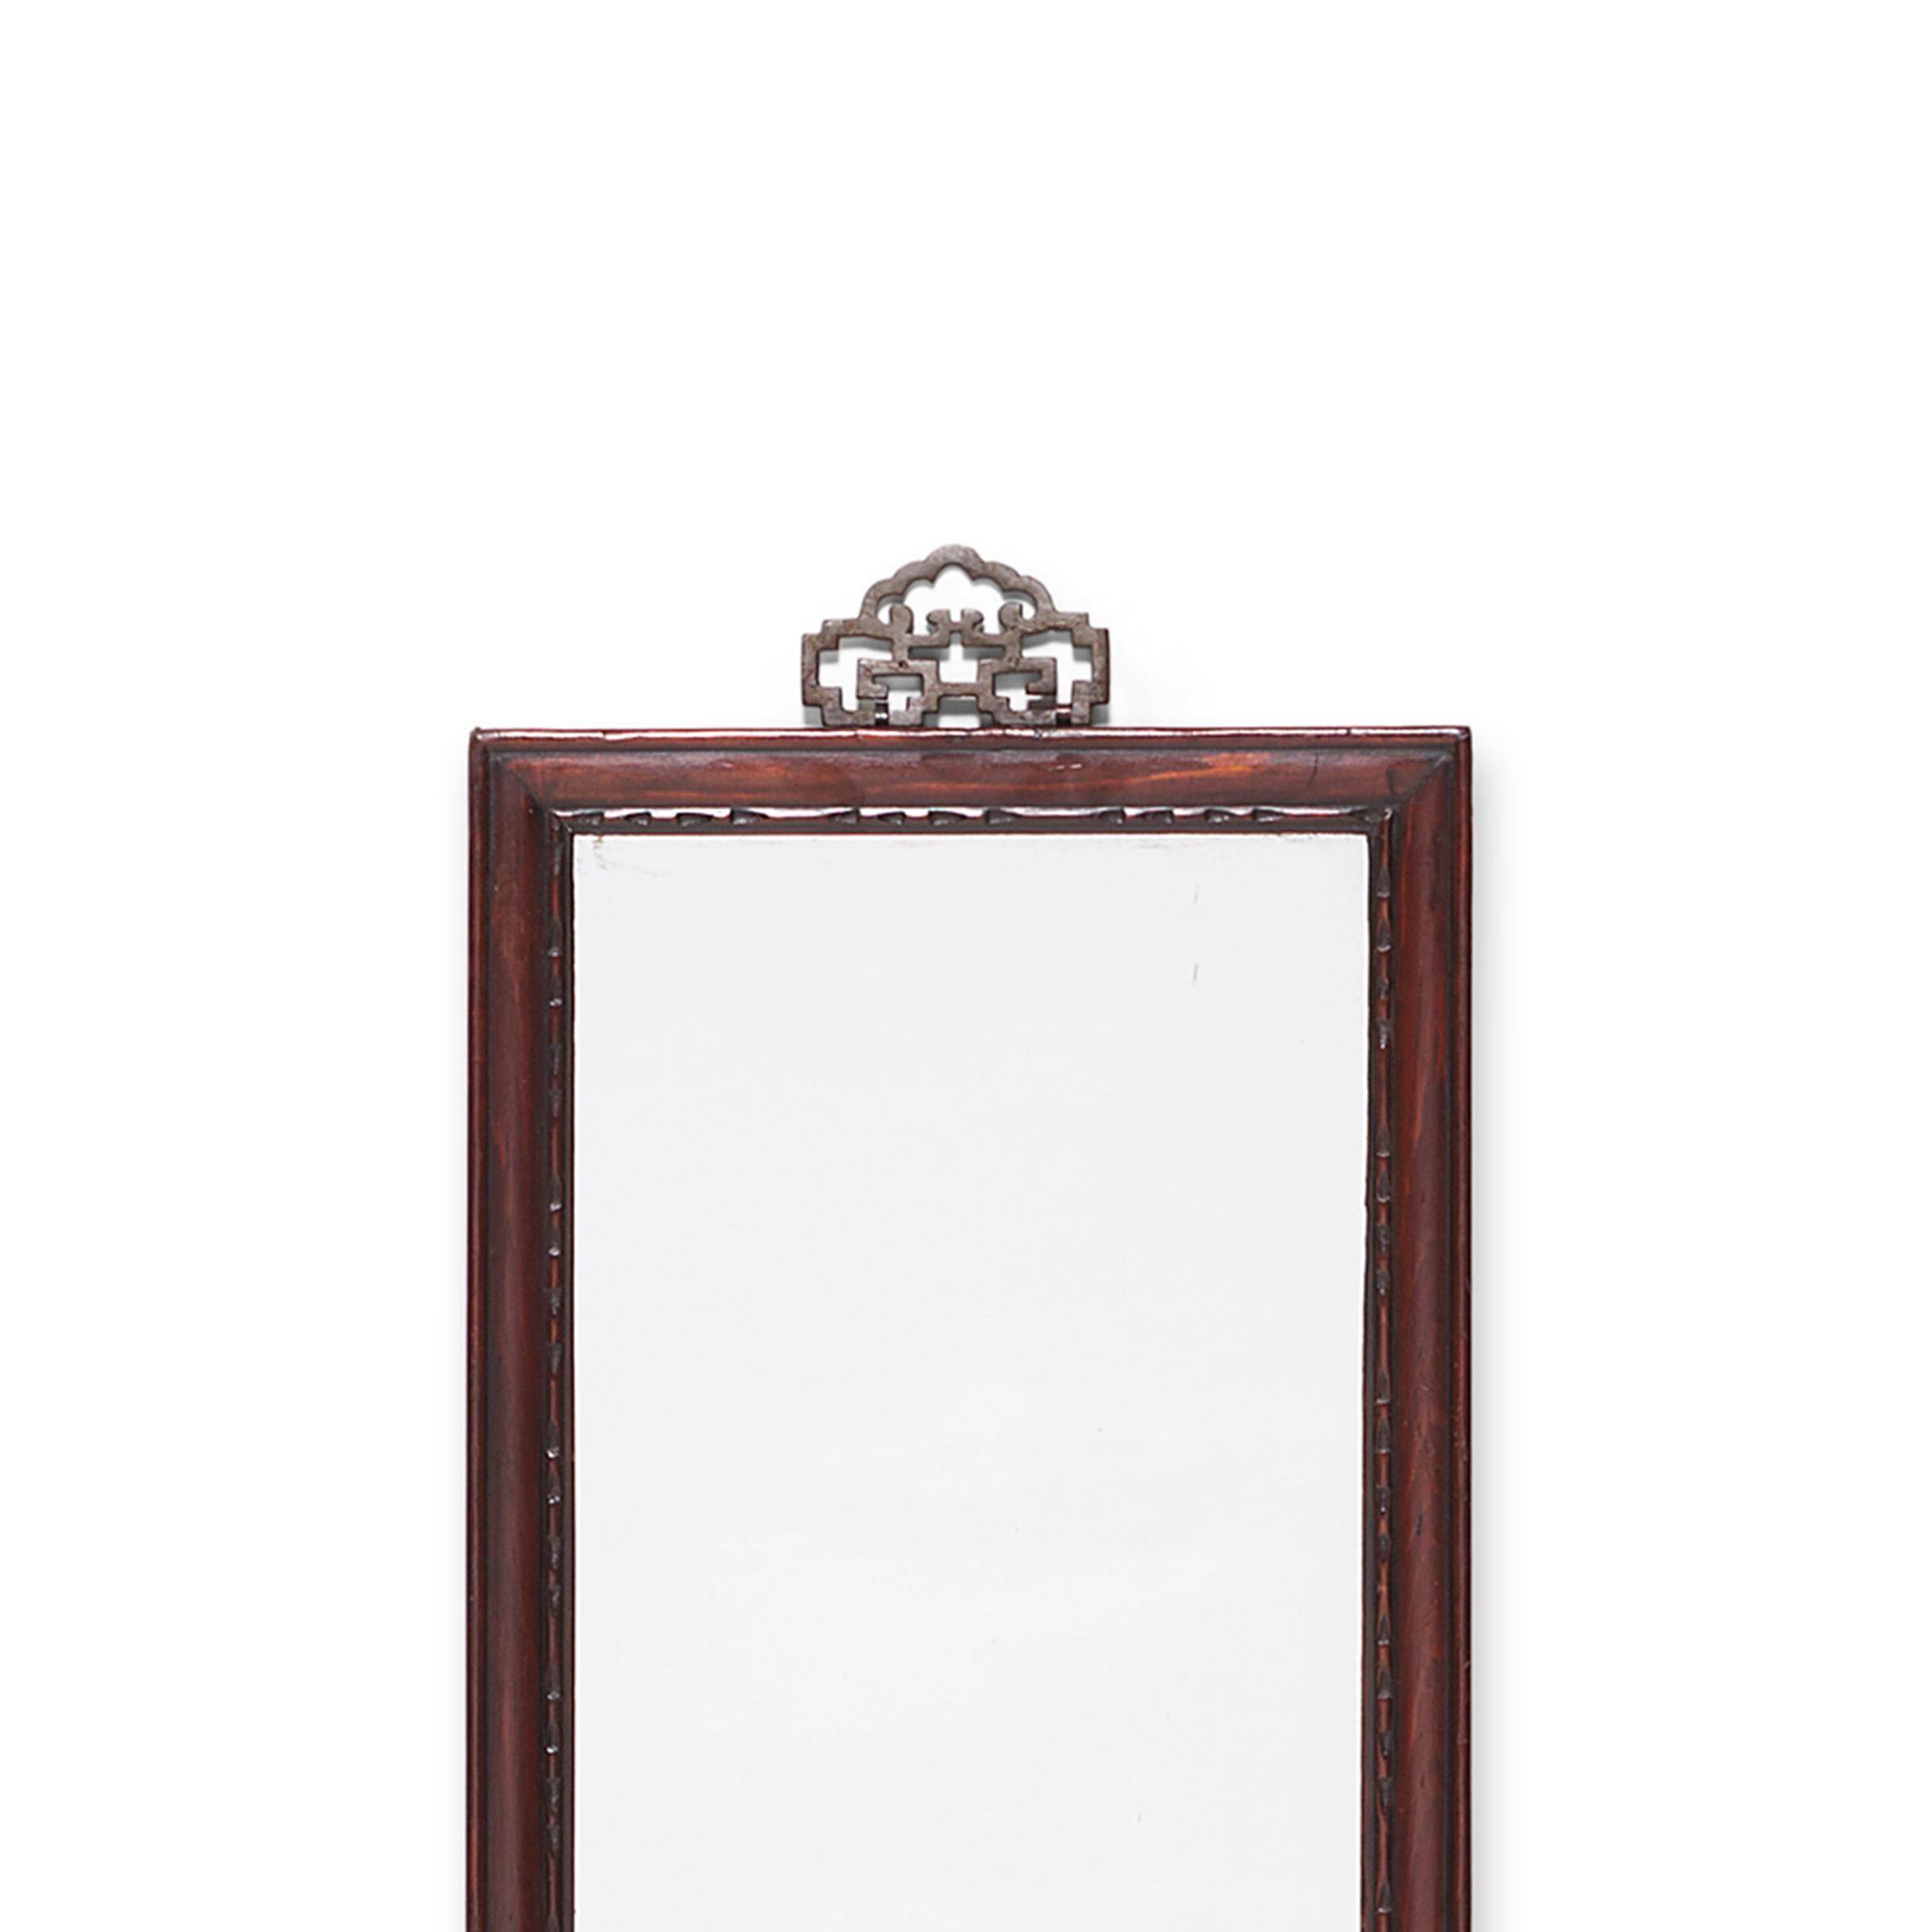 This early 20th century mirror is crafted of hand carved pine and once hung on the wall of a Qing-dynasty home, perhaps in a ladies sleeping quarters. Subtle notches pattern the frame's finely beaded edges and brass hardware adorns the top, formed